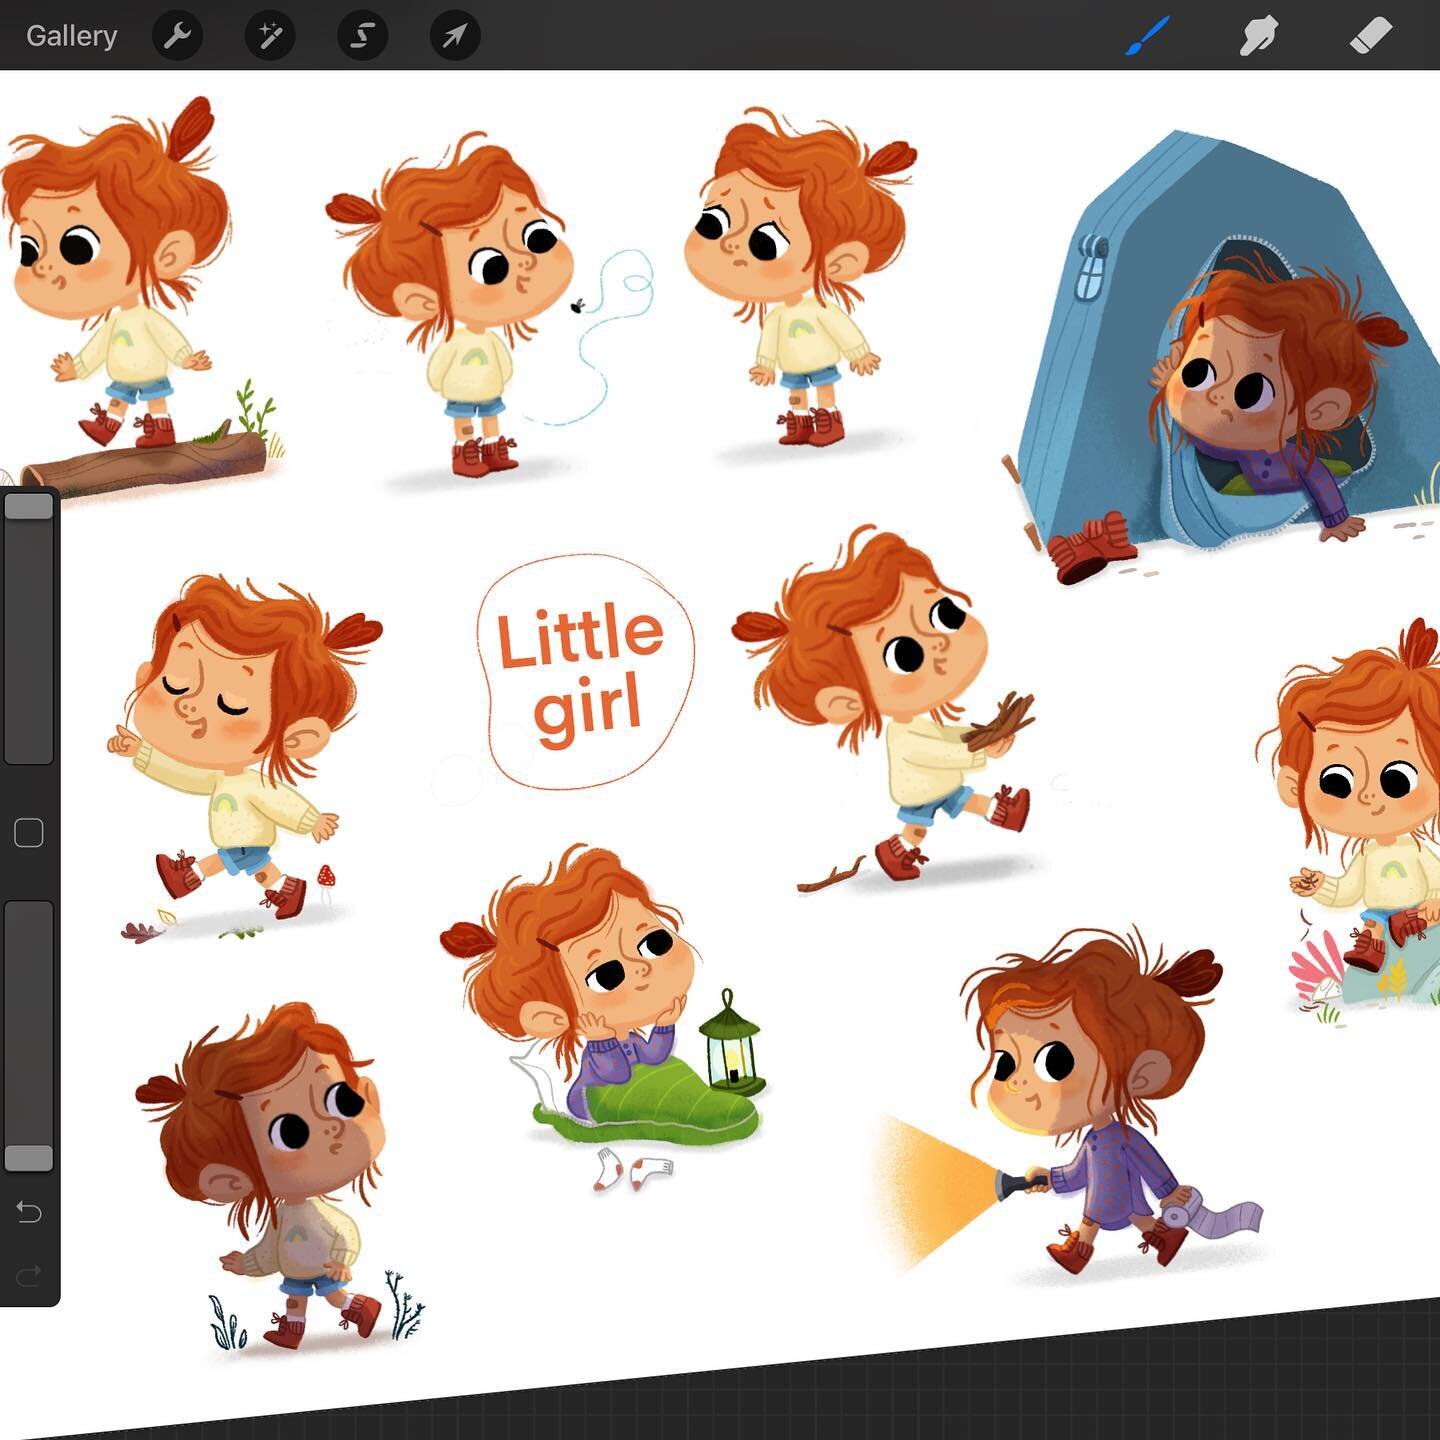 Character study part II #childrensbook #characterstudy